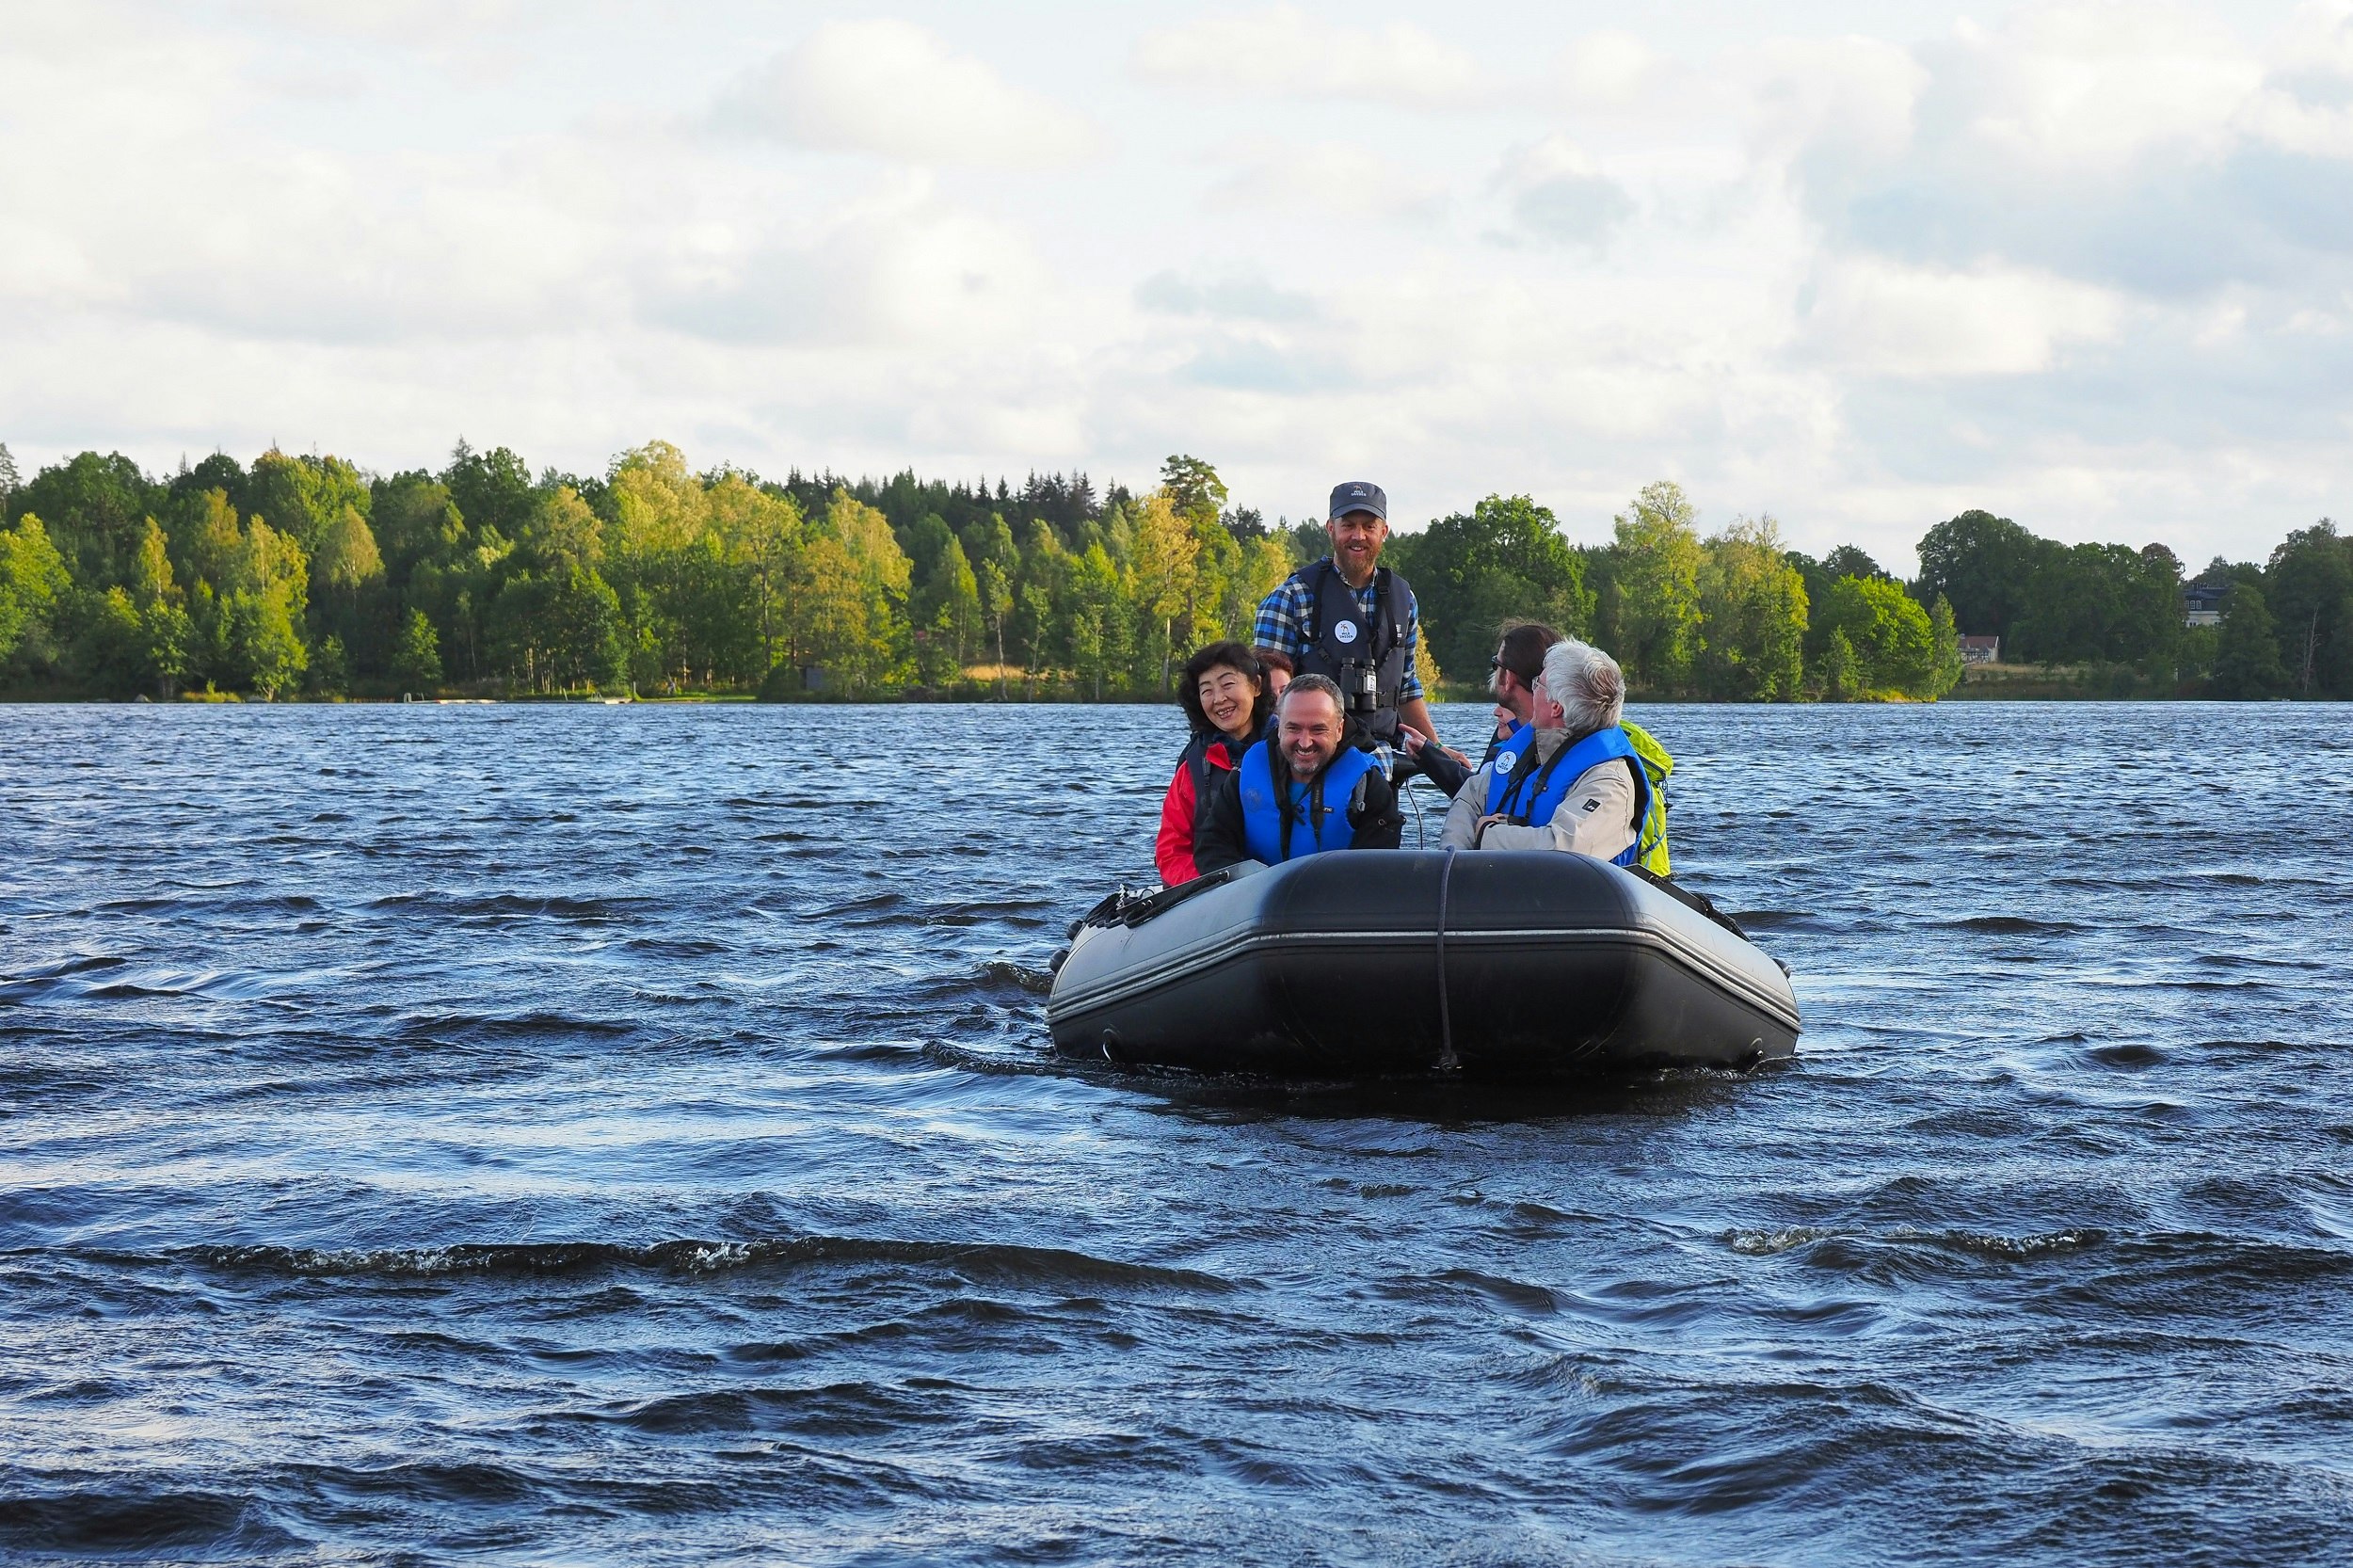 An RIB (rigid inflatable boat) with an electric engine tours a lake with several guests